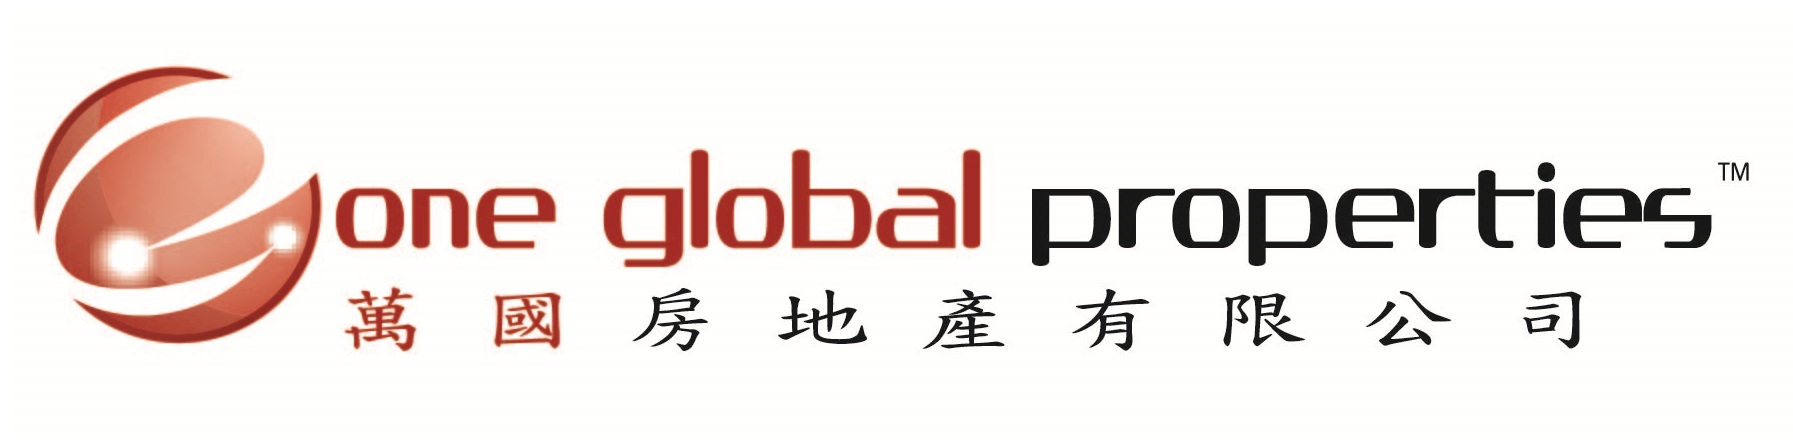 One Global Properties Home Page